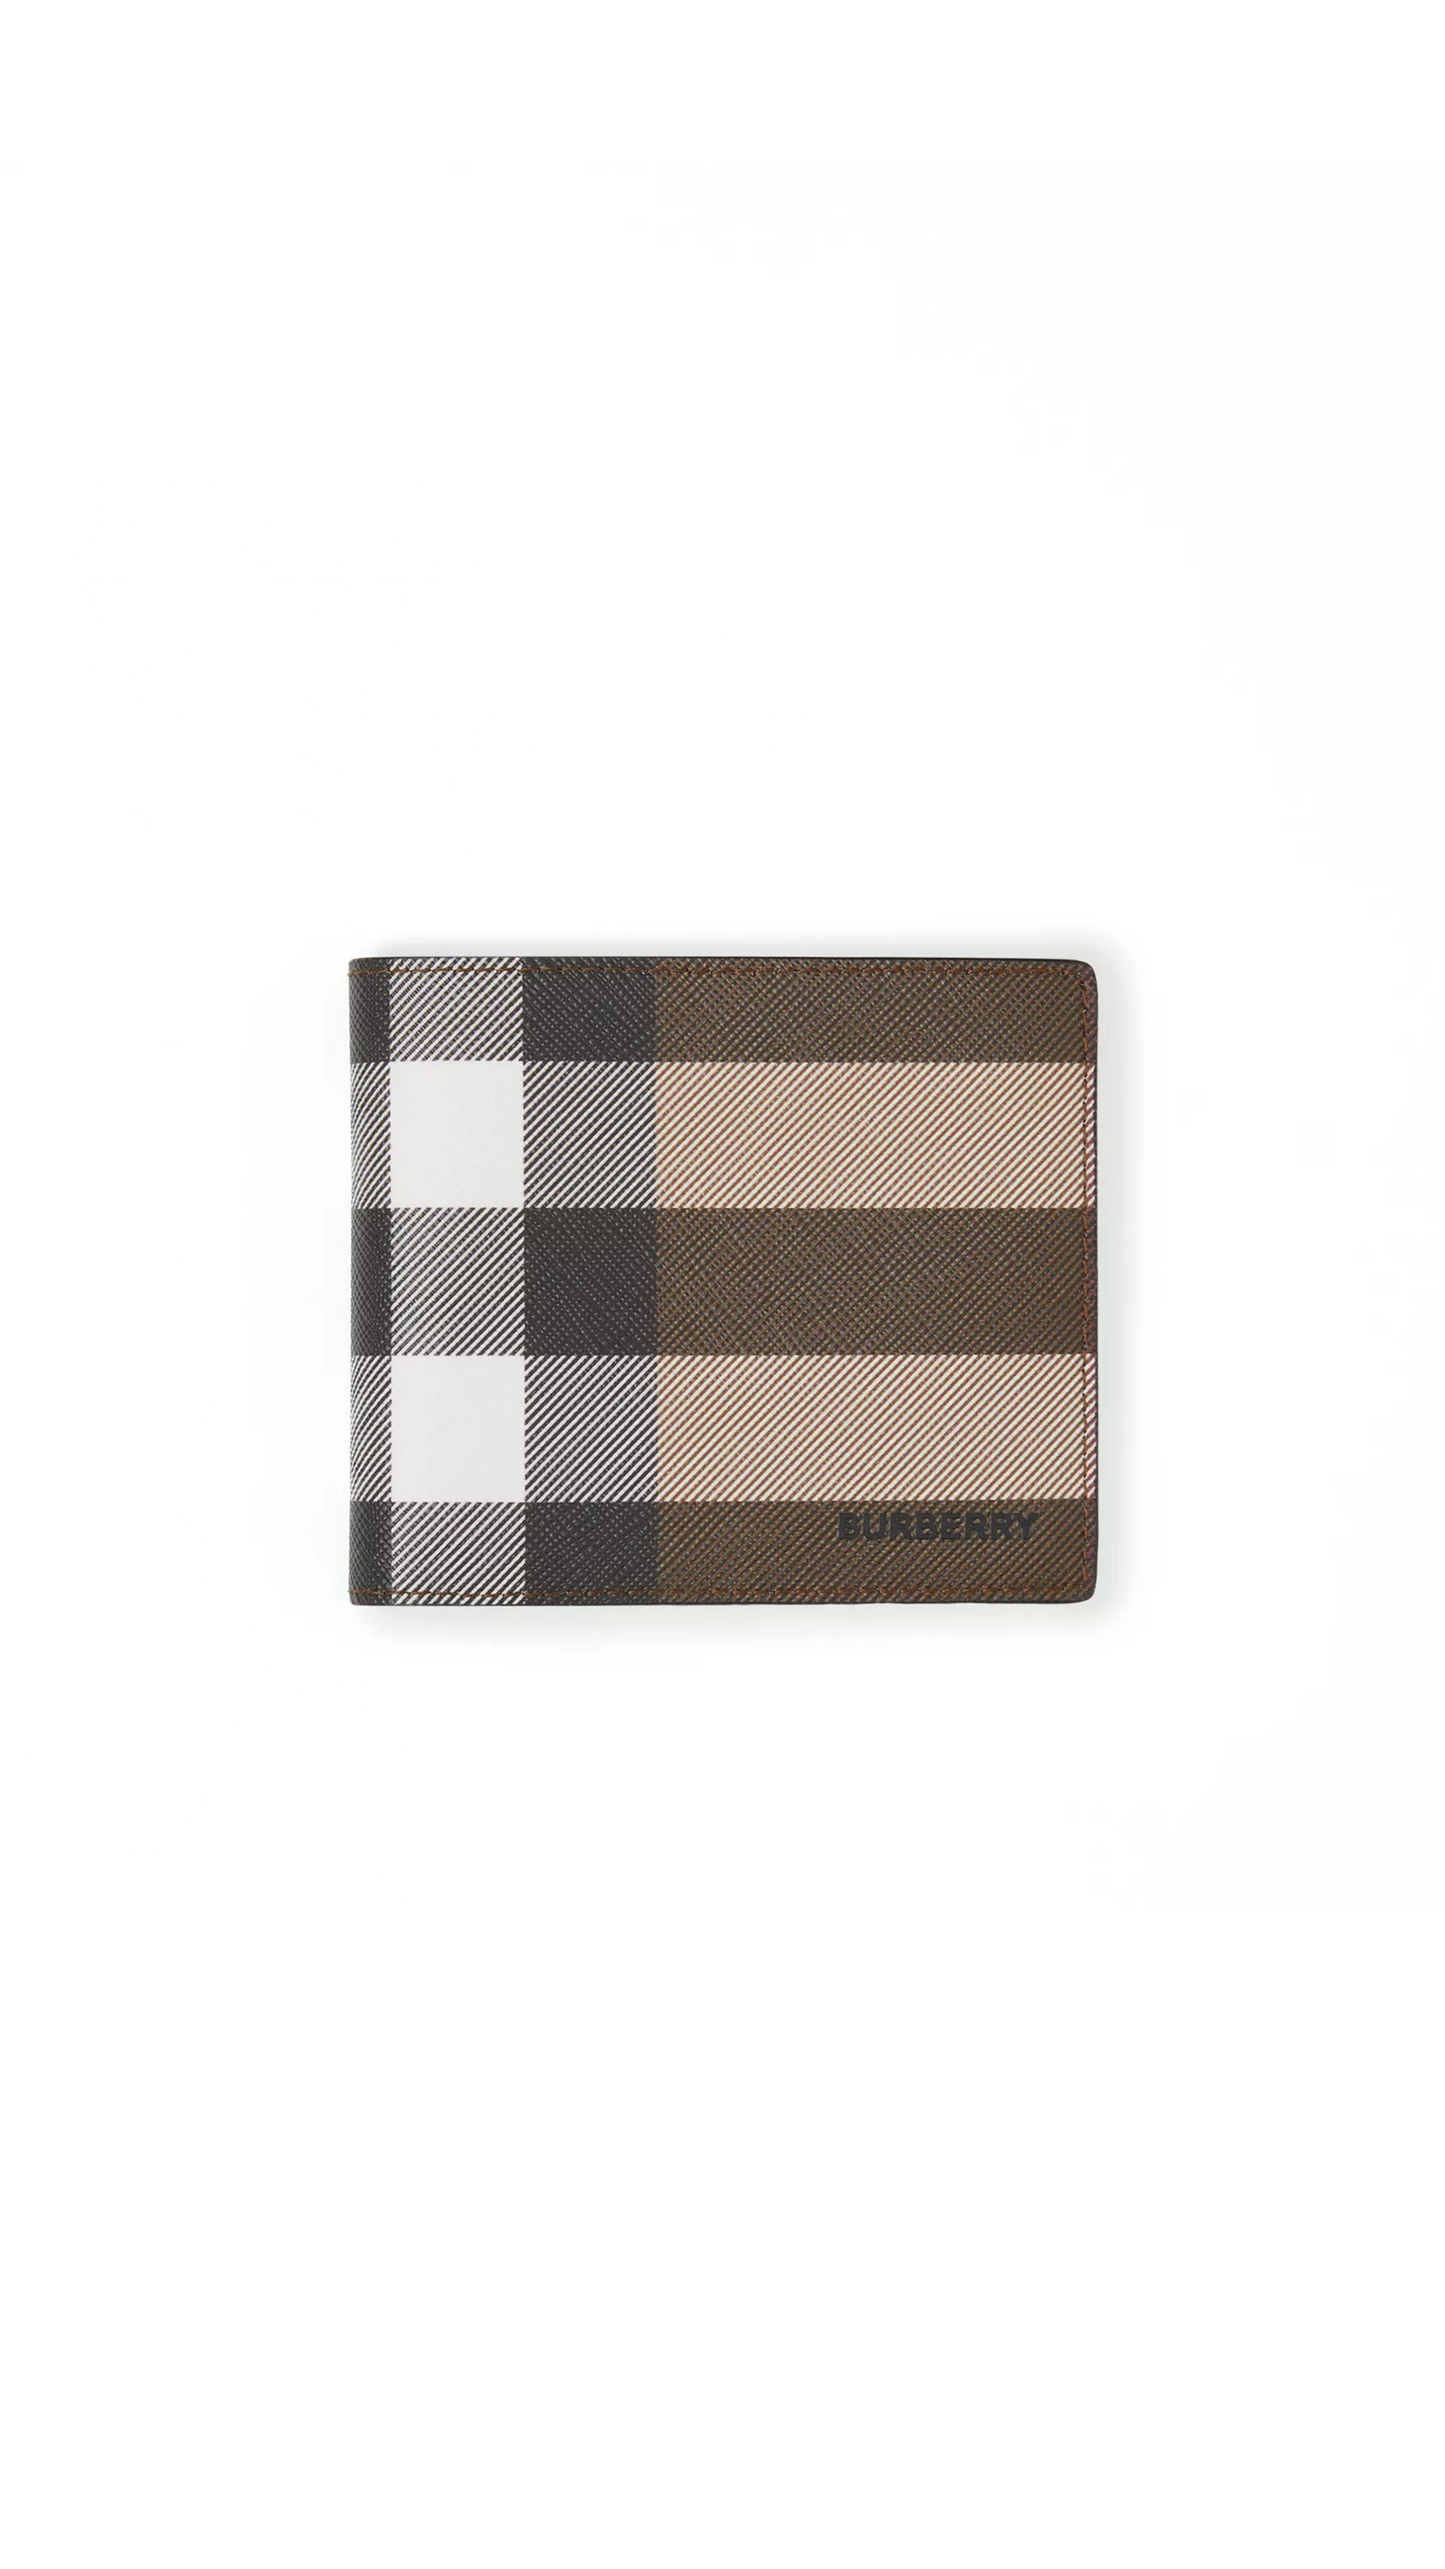 Exaggerated Check and Leather Bifold Wallet - Dark Birch Brown